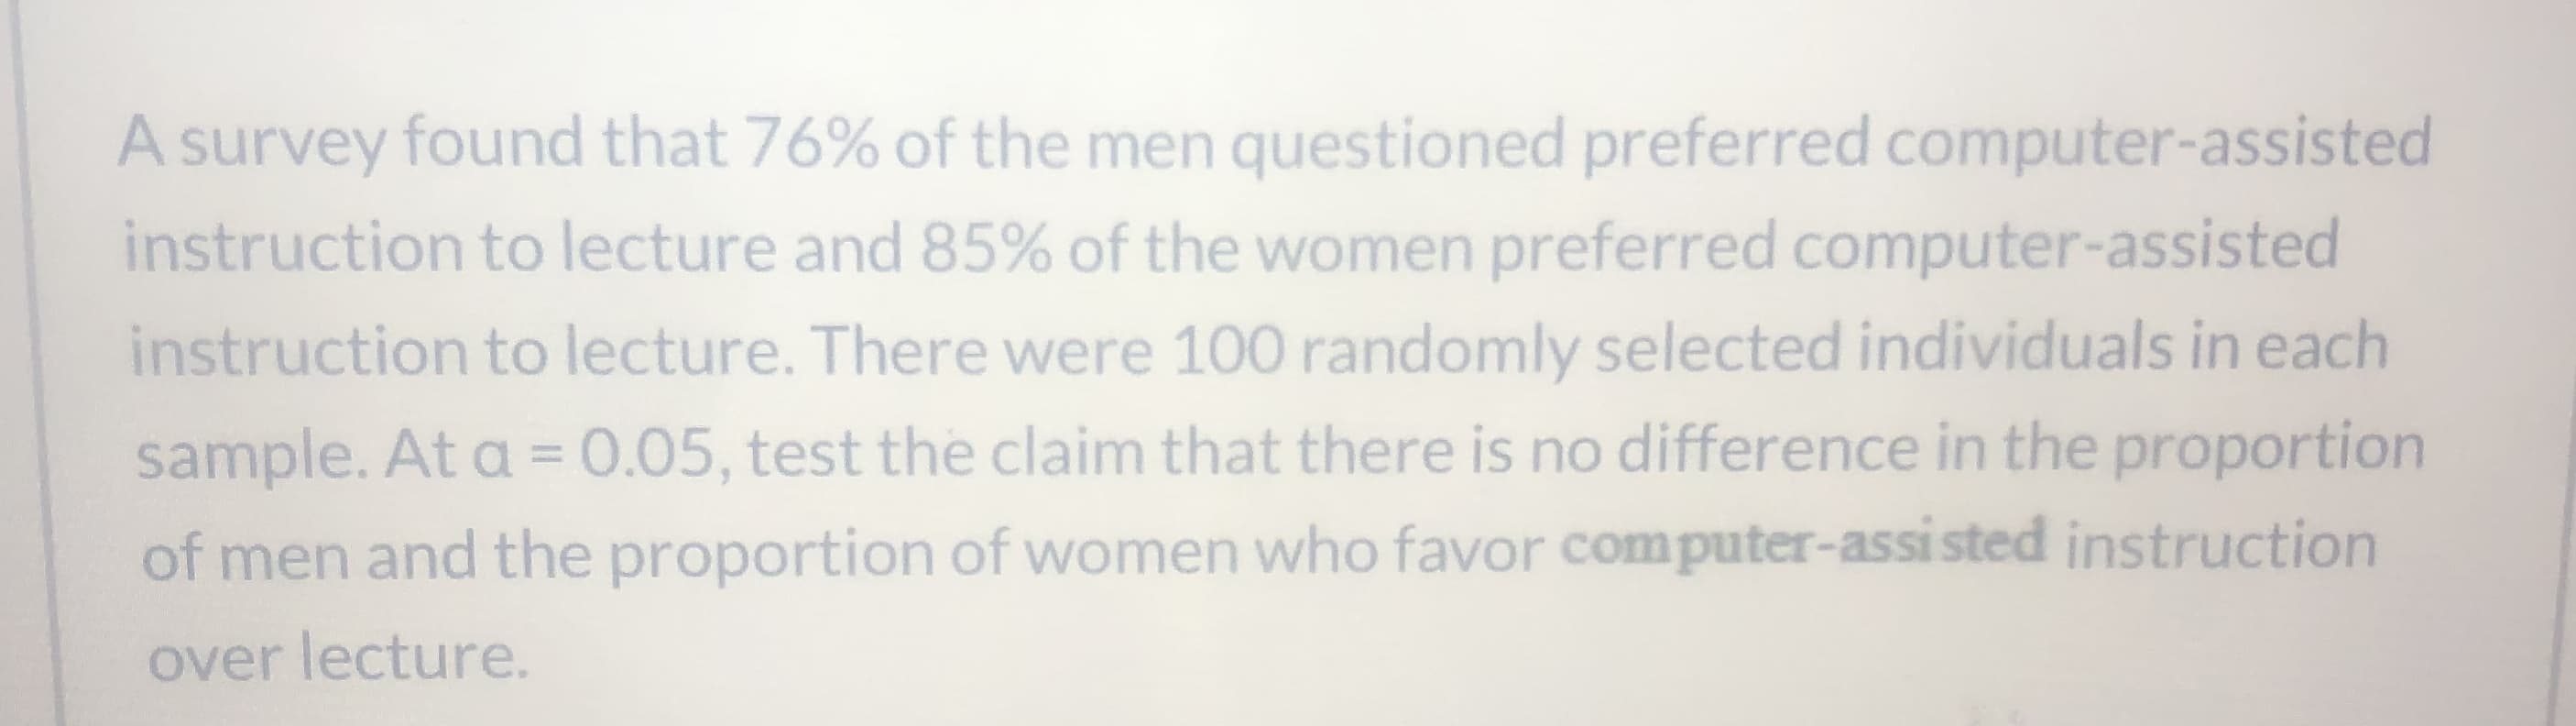 A survey found that 76% of the men questioned preferred computer-assisted
instruction to lecture and 85% of the women preferred computer-assisted
instruction to lecture. There were 100 randomly selected individuals in each
sample. At a =0.05, test the claim that there is no difference in the proportion
of men and the proportion of women who favor computer-assi sted instruction
over lecture.
